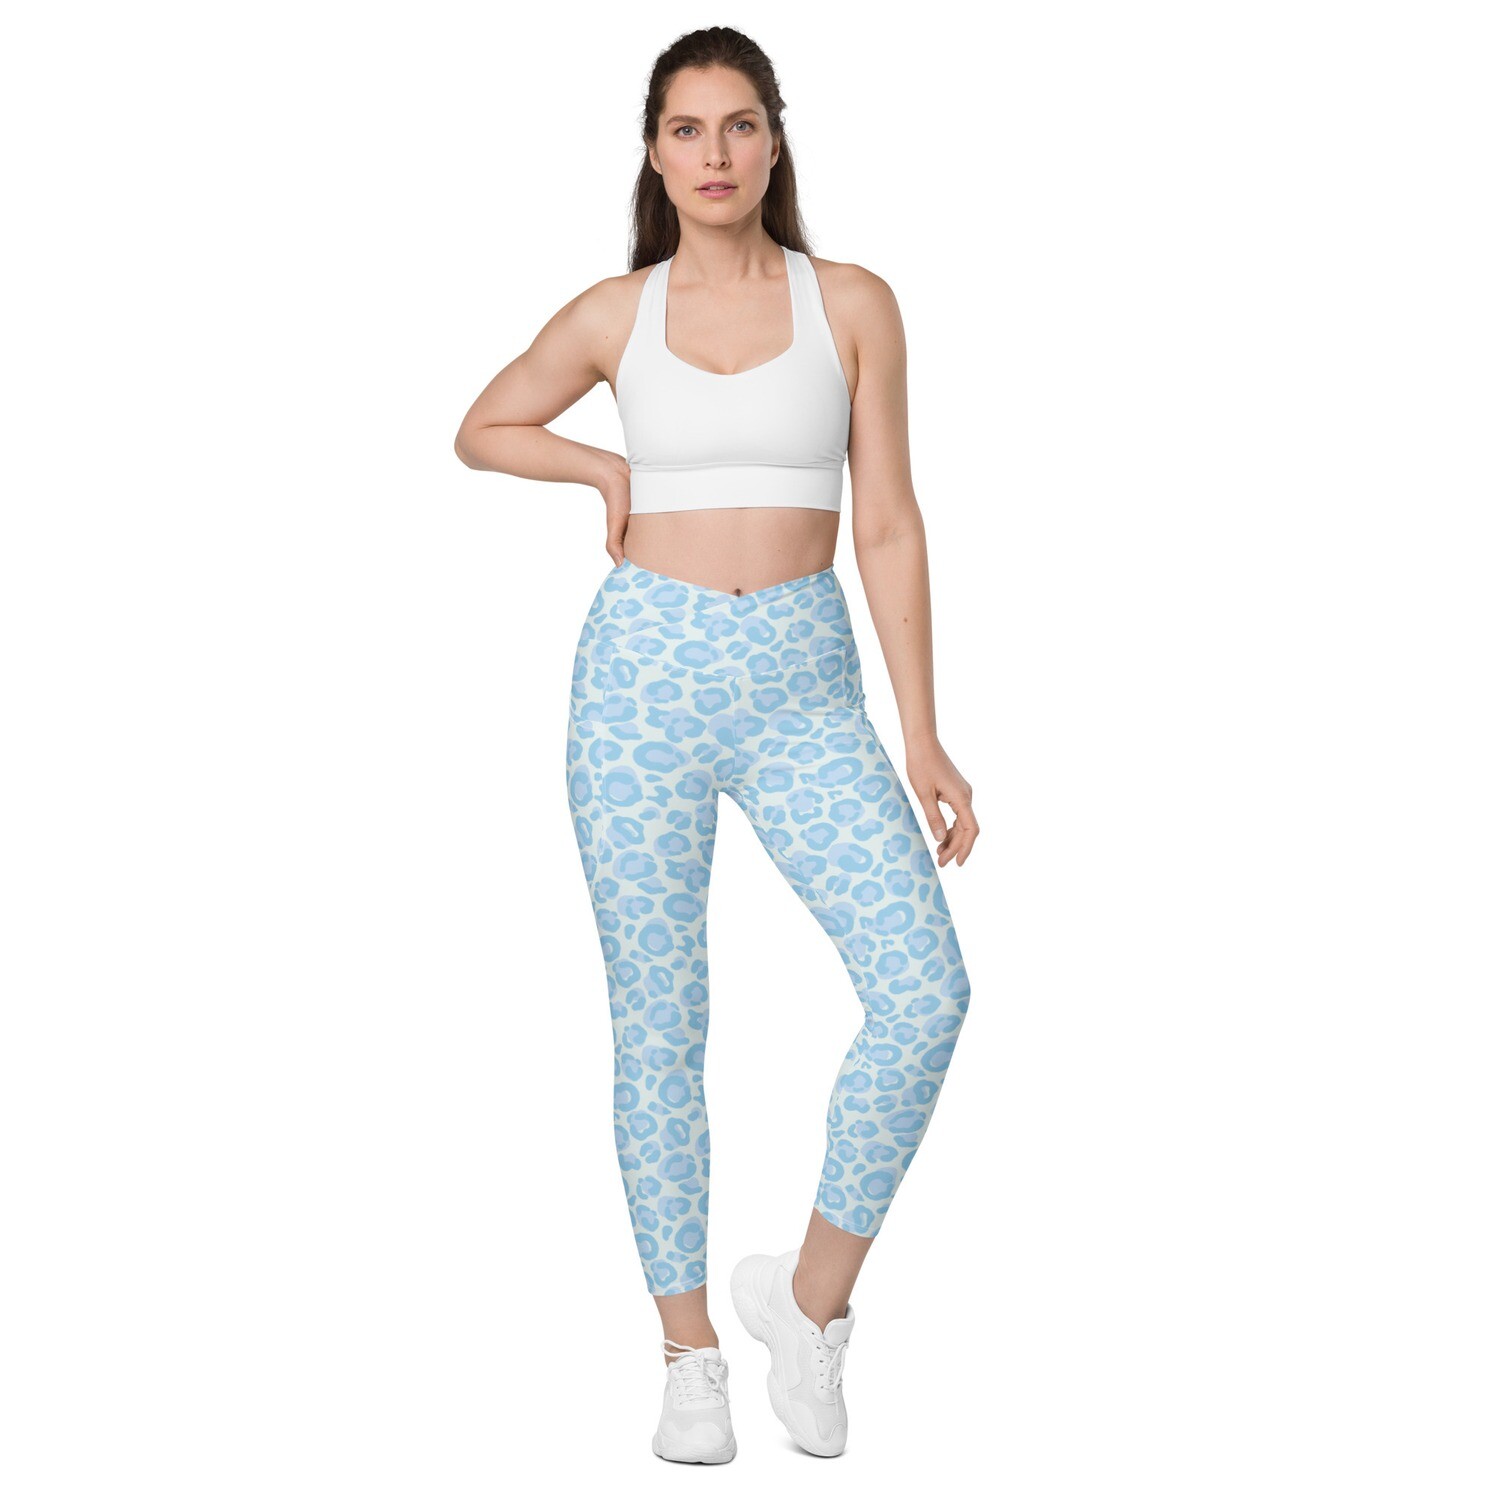   Blue leopard Crossover leggings with pockets